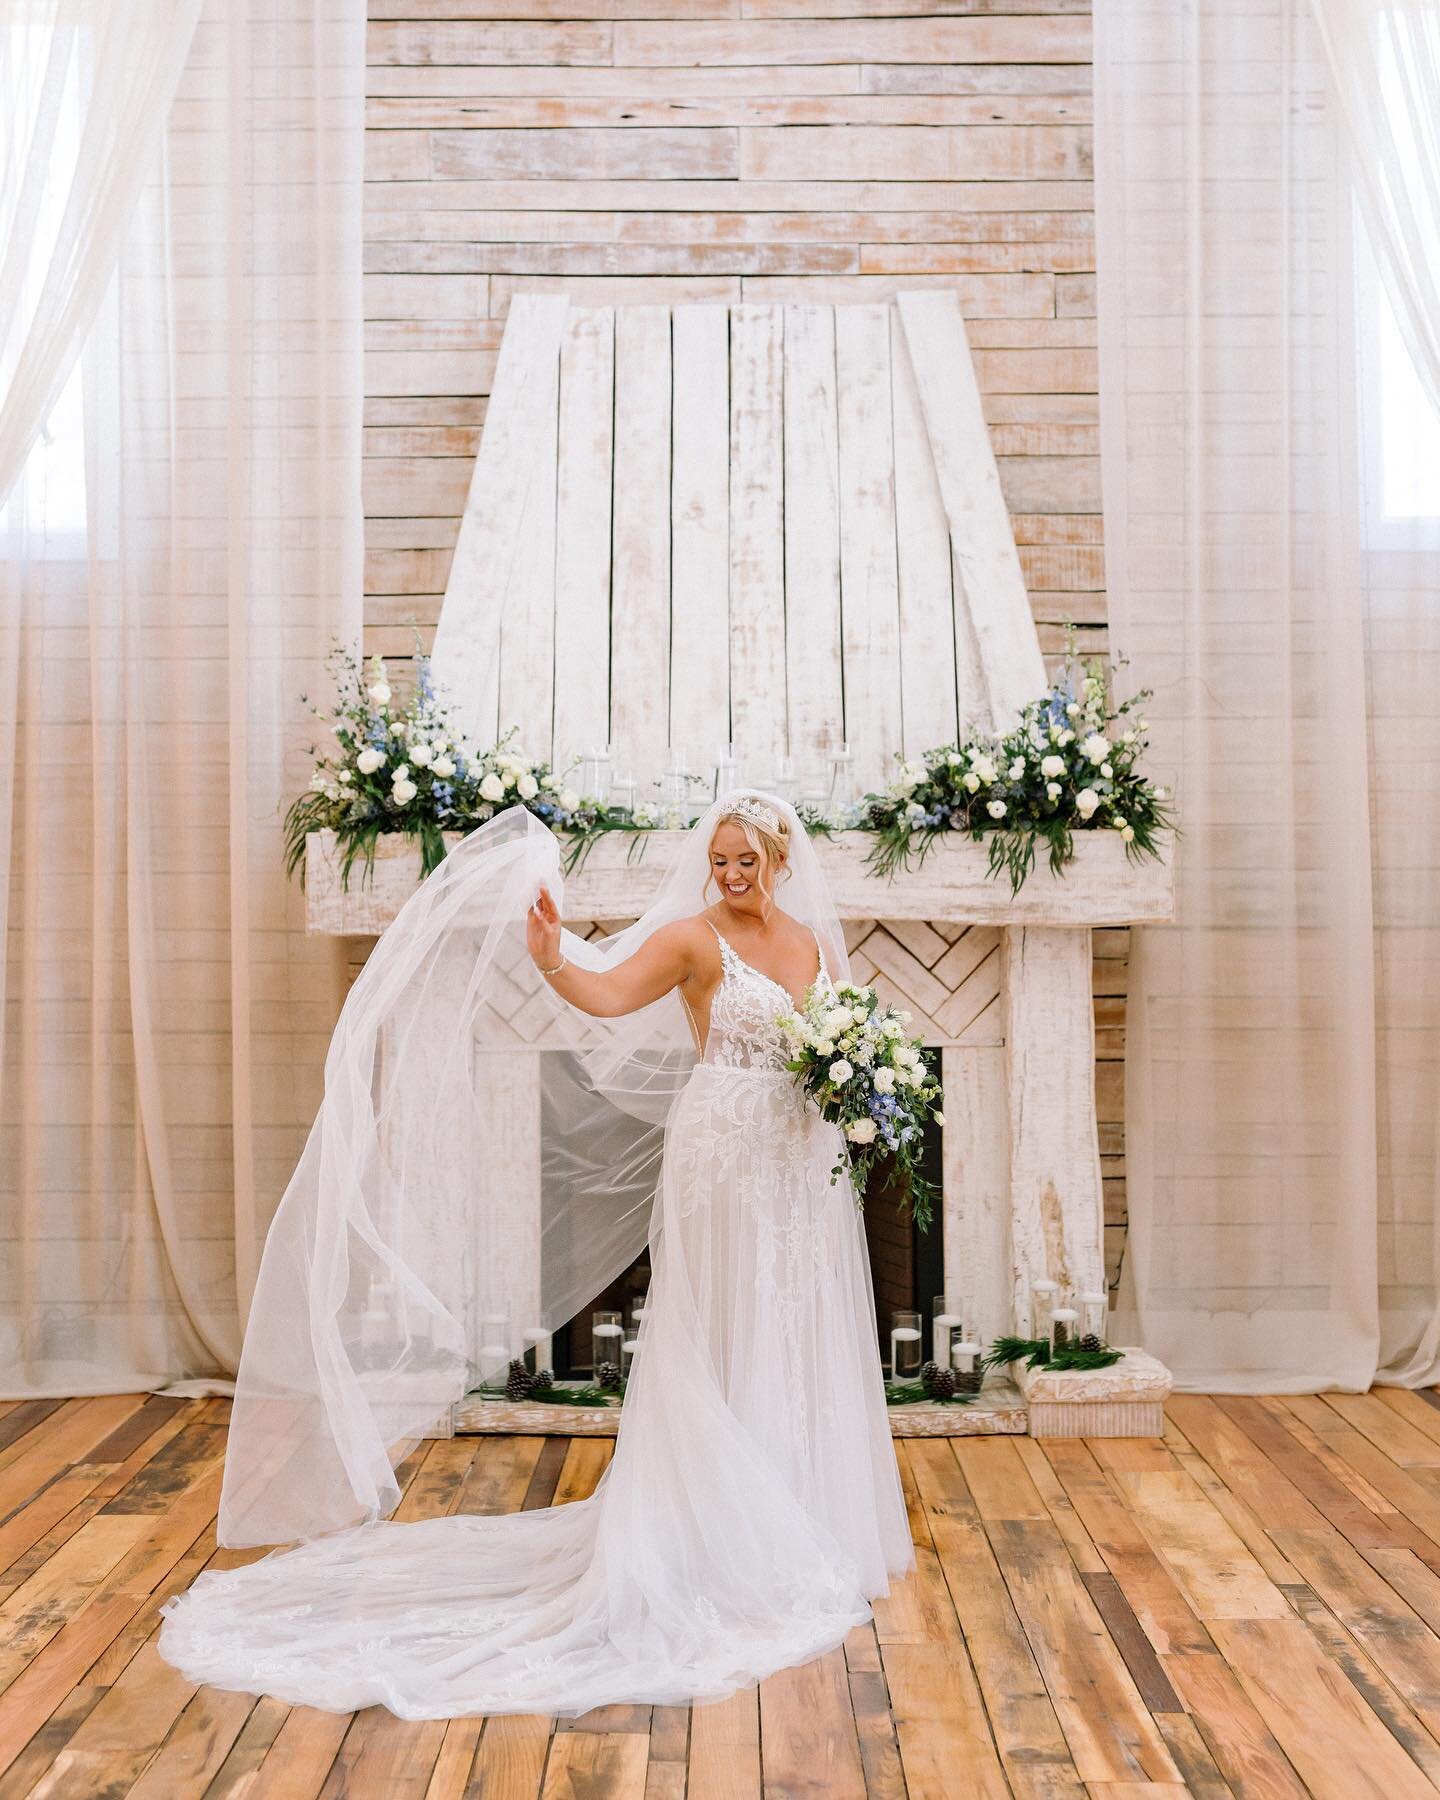 This week's East TN weather has us reminiscing on a snowy wedding day in March for Rachel and Grant! Winter weddings at Ramble Creek are simply unmatched. With a full staff and a foolproof plan, we welcome the snowy weather! This couple was dreaming 